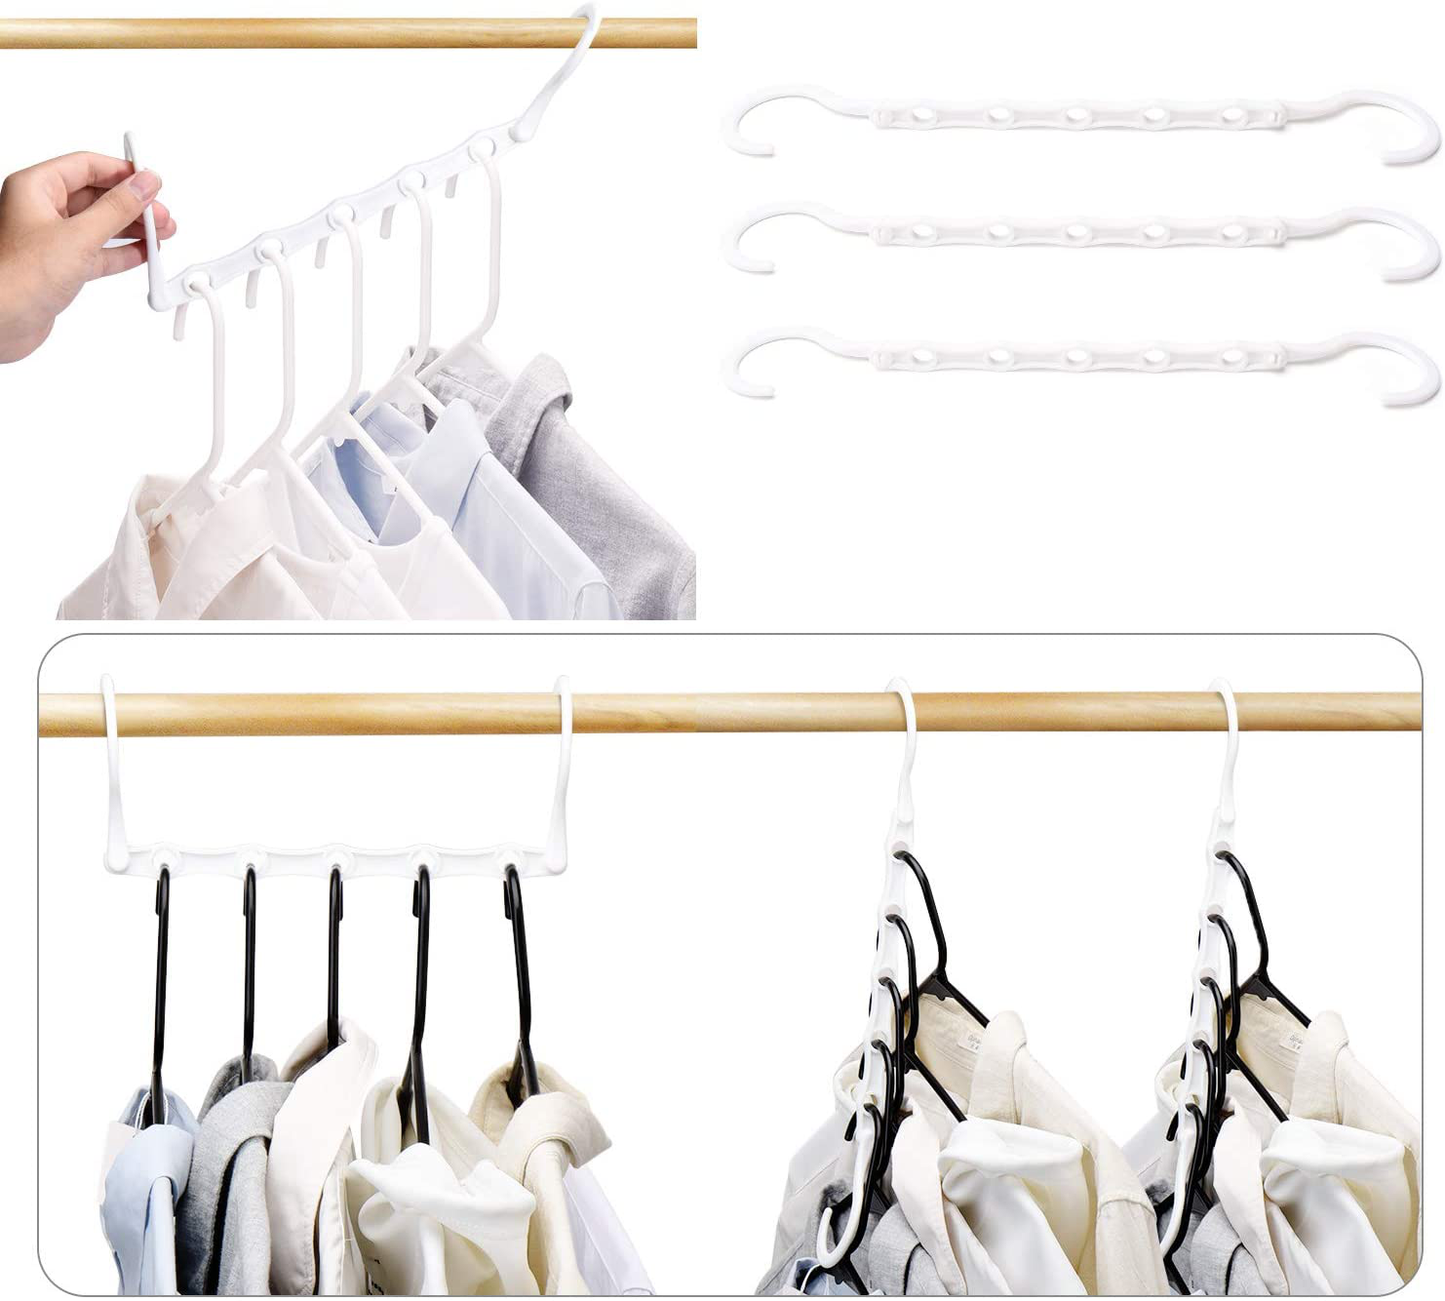 HOUSE DAY White Magic Hangers Space Saving Clothes Hangers Organizer Smart Closet Space Saver Pack of 10 with Sturdy Plastic for Heavy Clothes